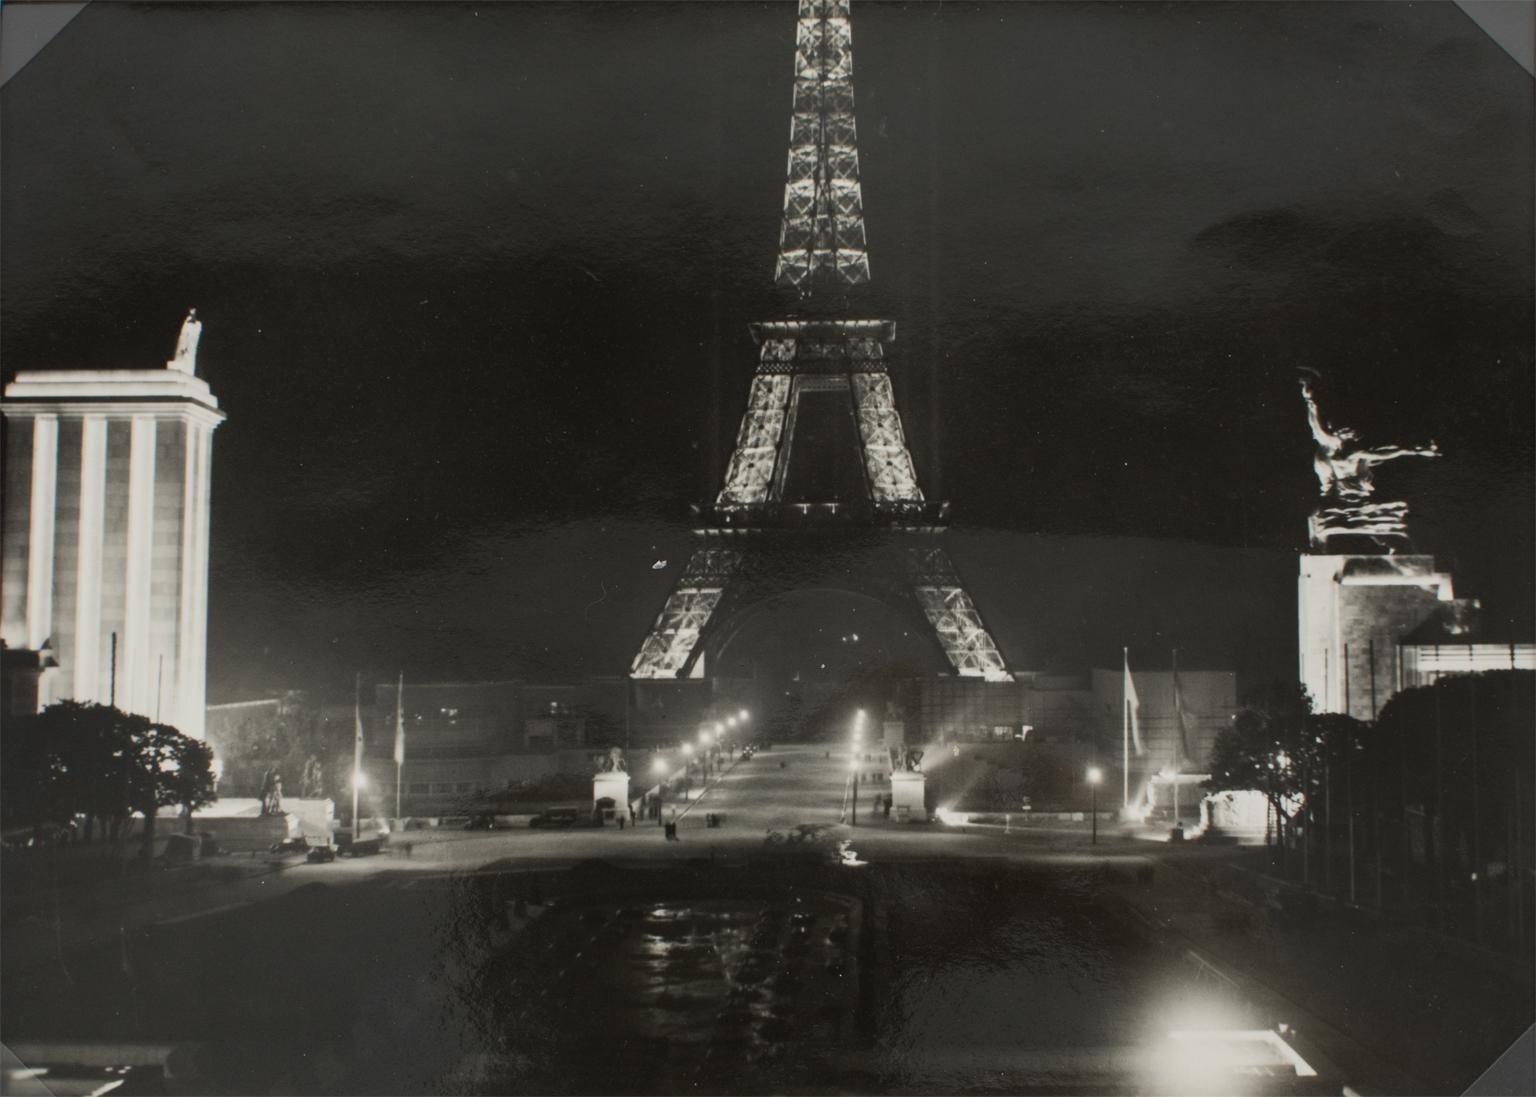 The Eiffel Tower by night 1937 Silver Gelatin Black & White Photograph